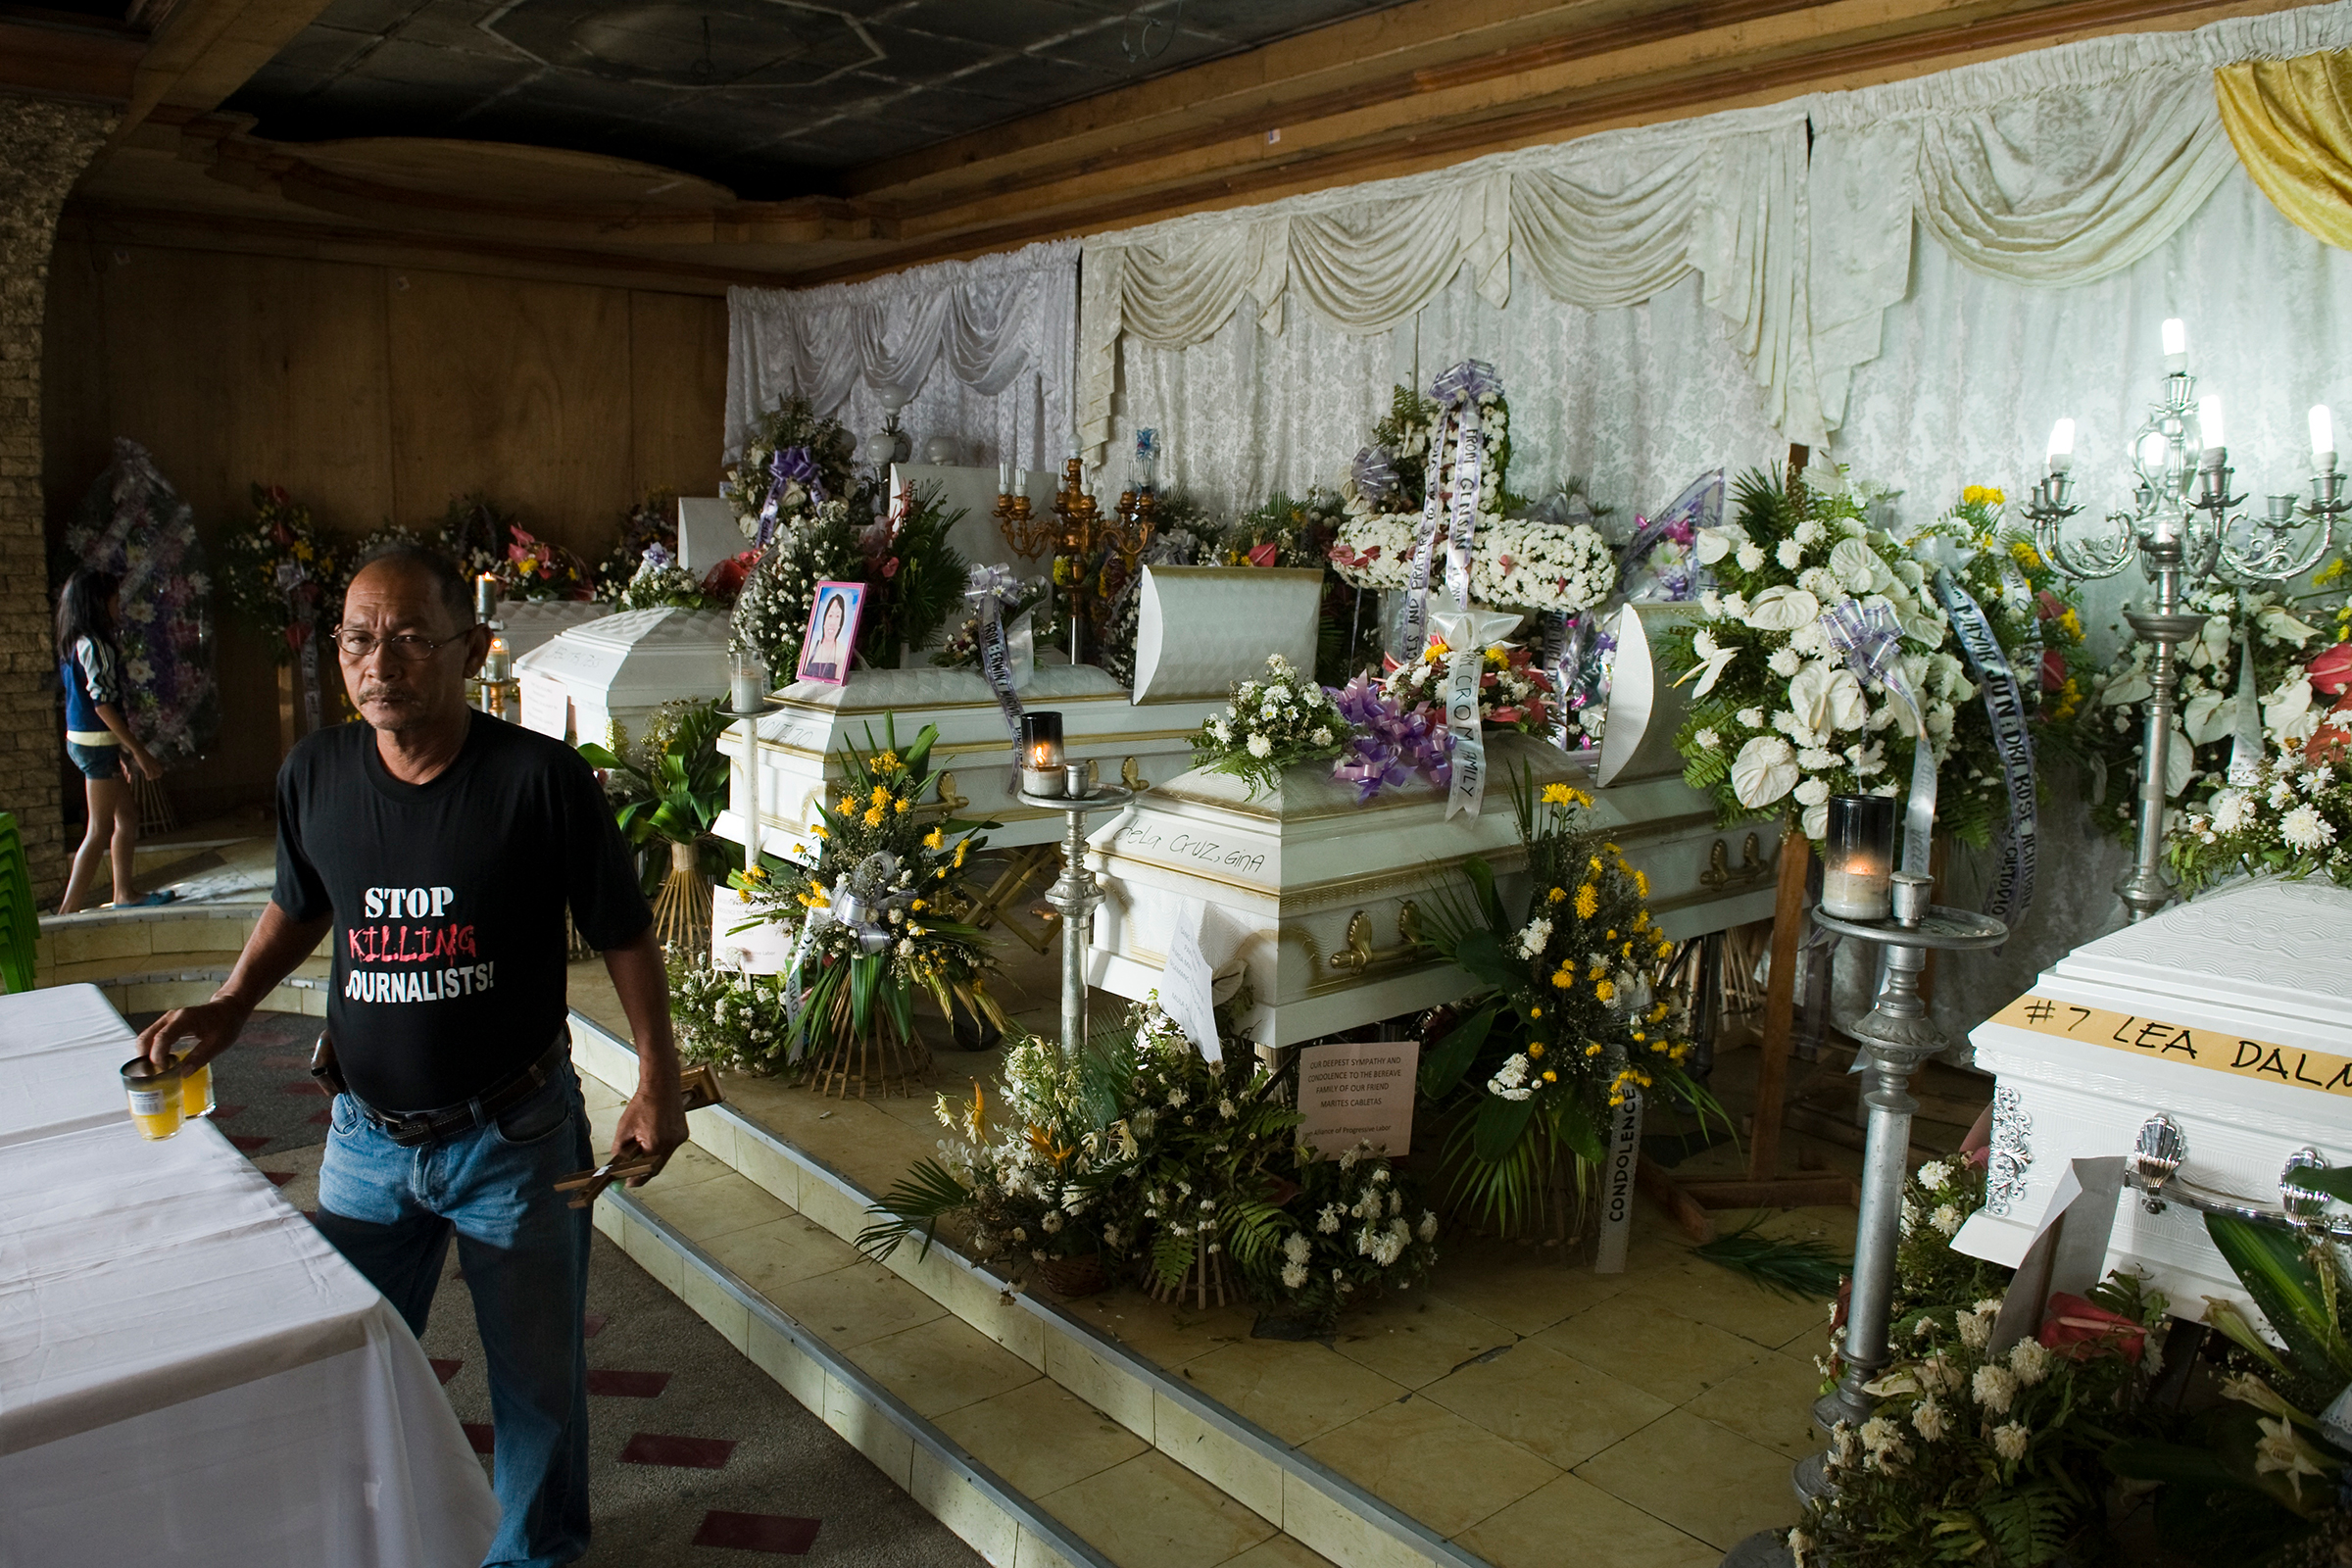 A wake for murdered journalists at the Collado Funeral Home in General Santos City, Mindanao, in 2009.